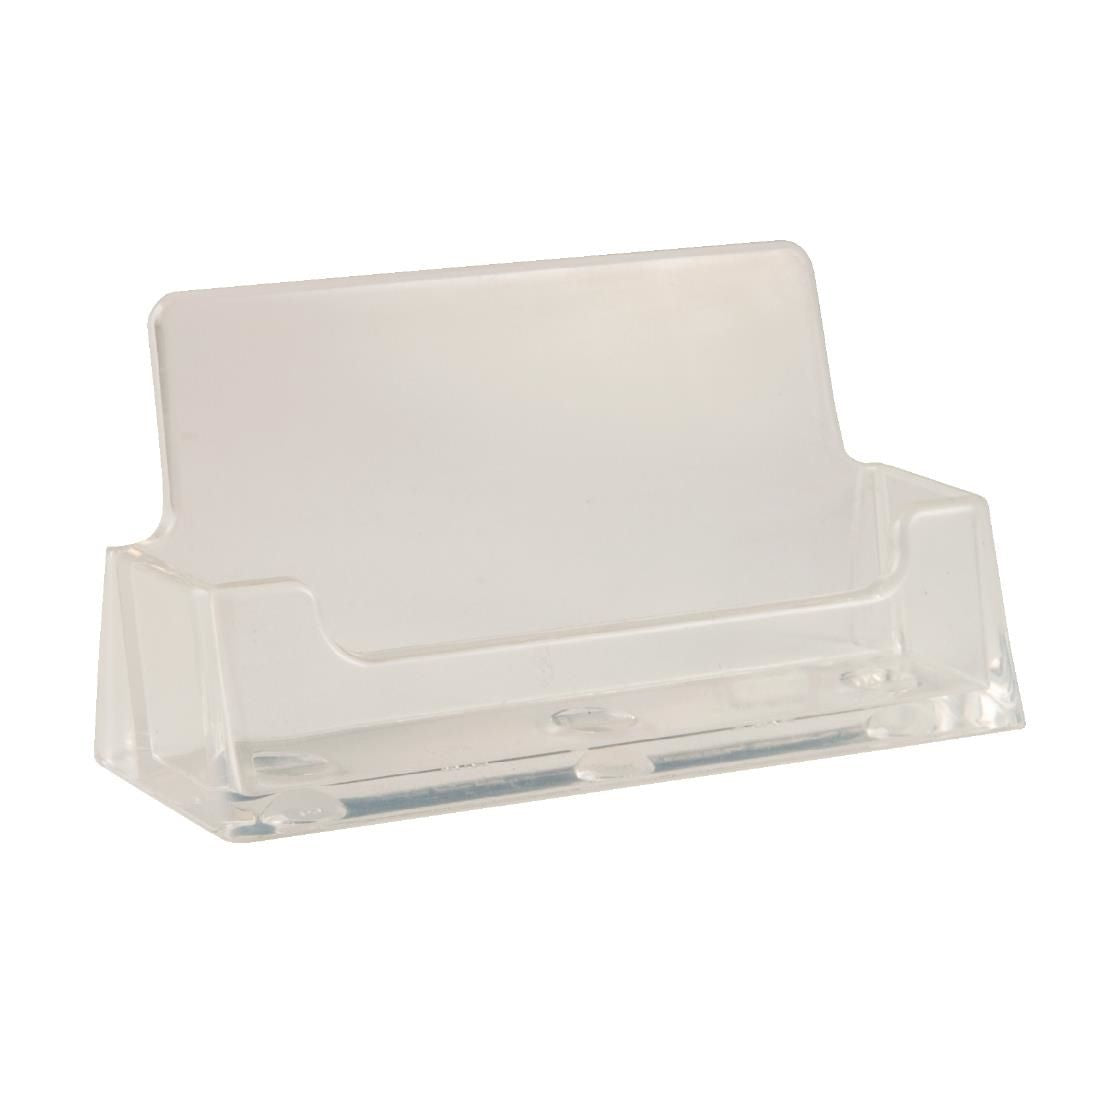 Business Card Holder JD Catering Equipment Solutions Ltd